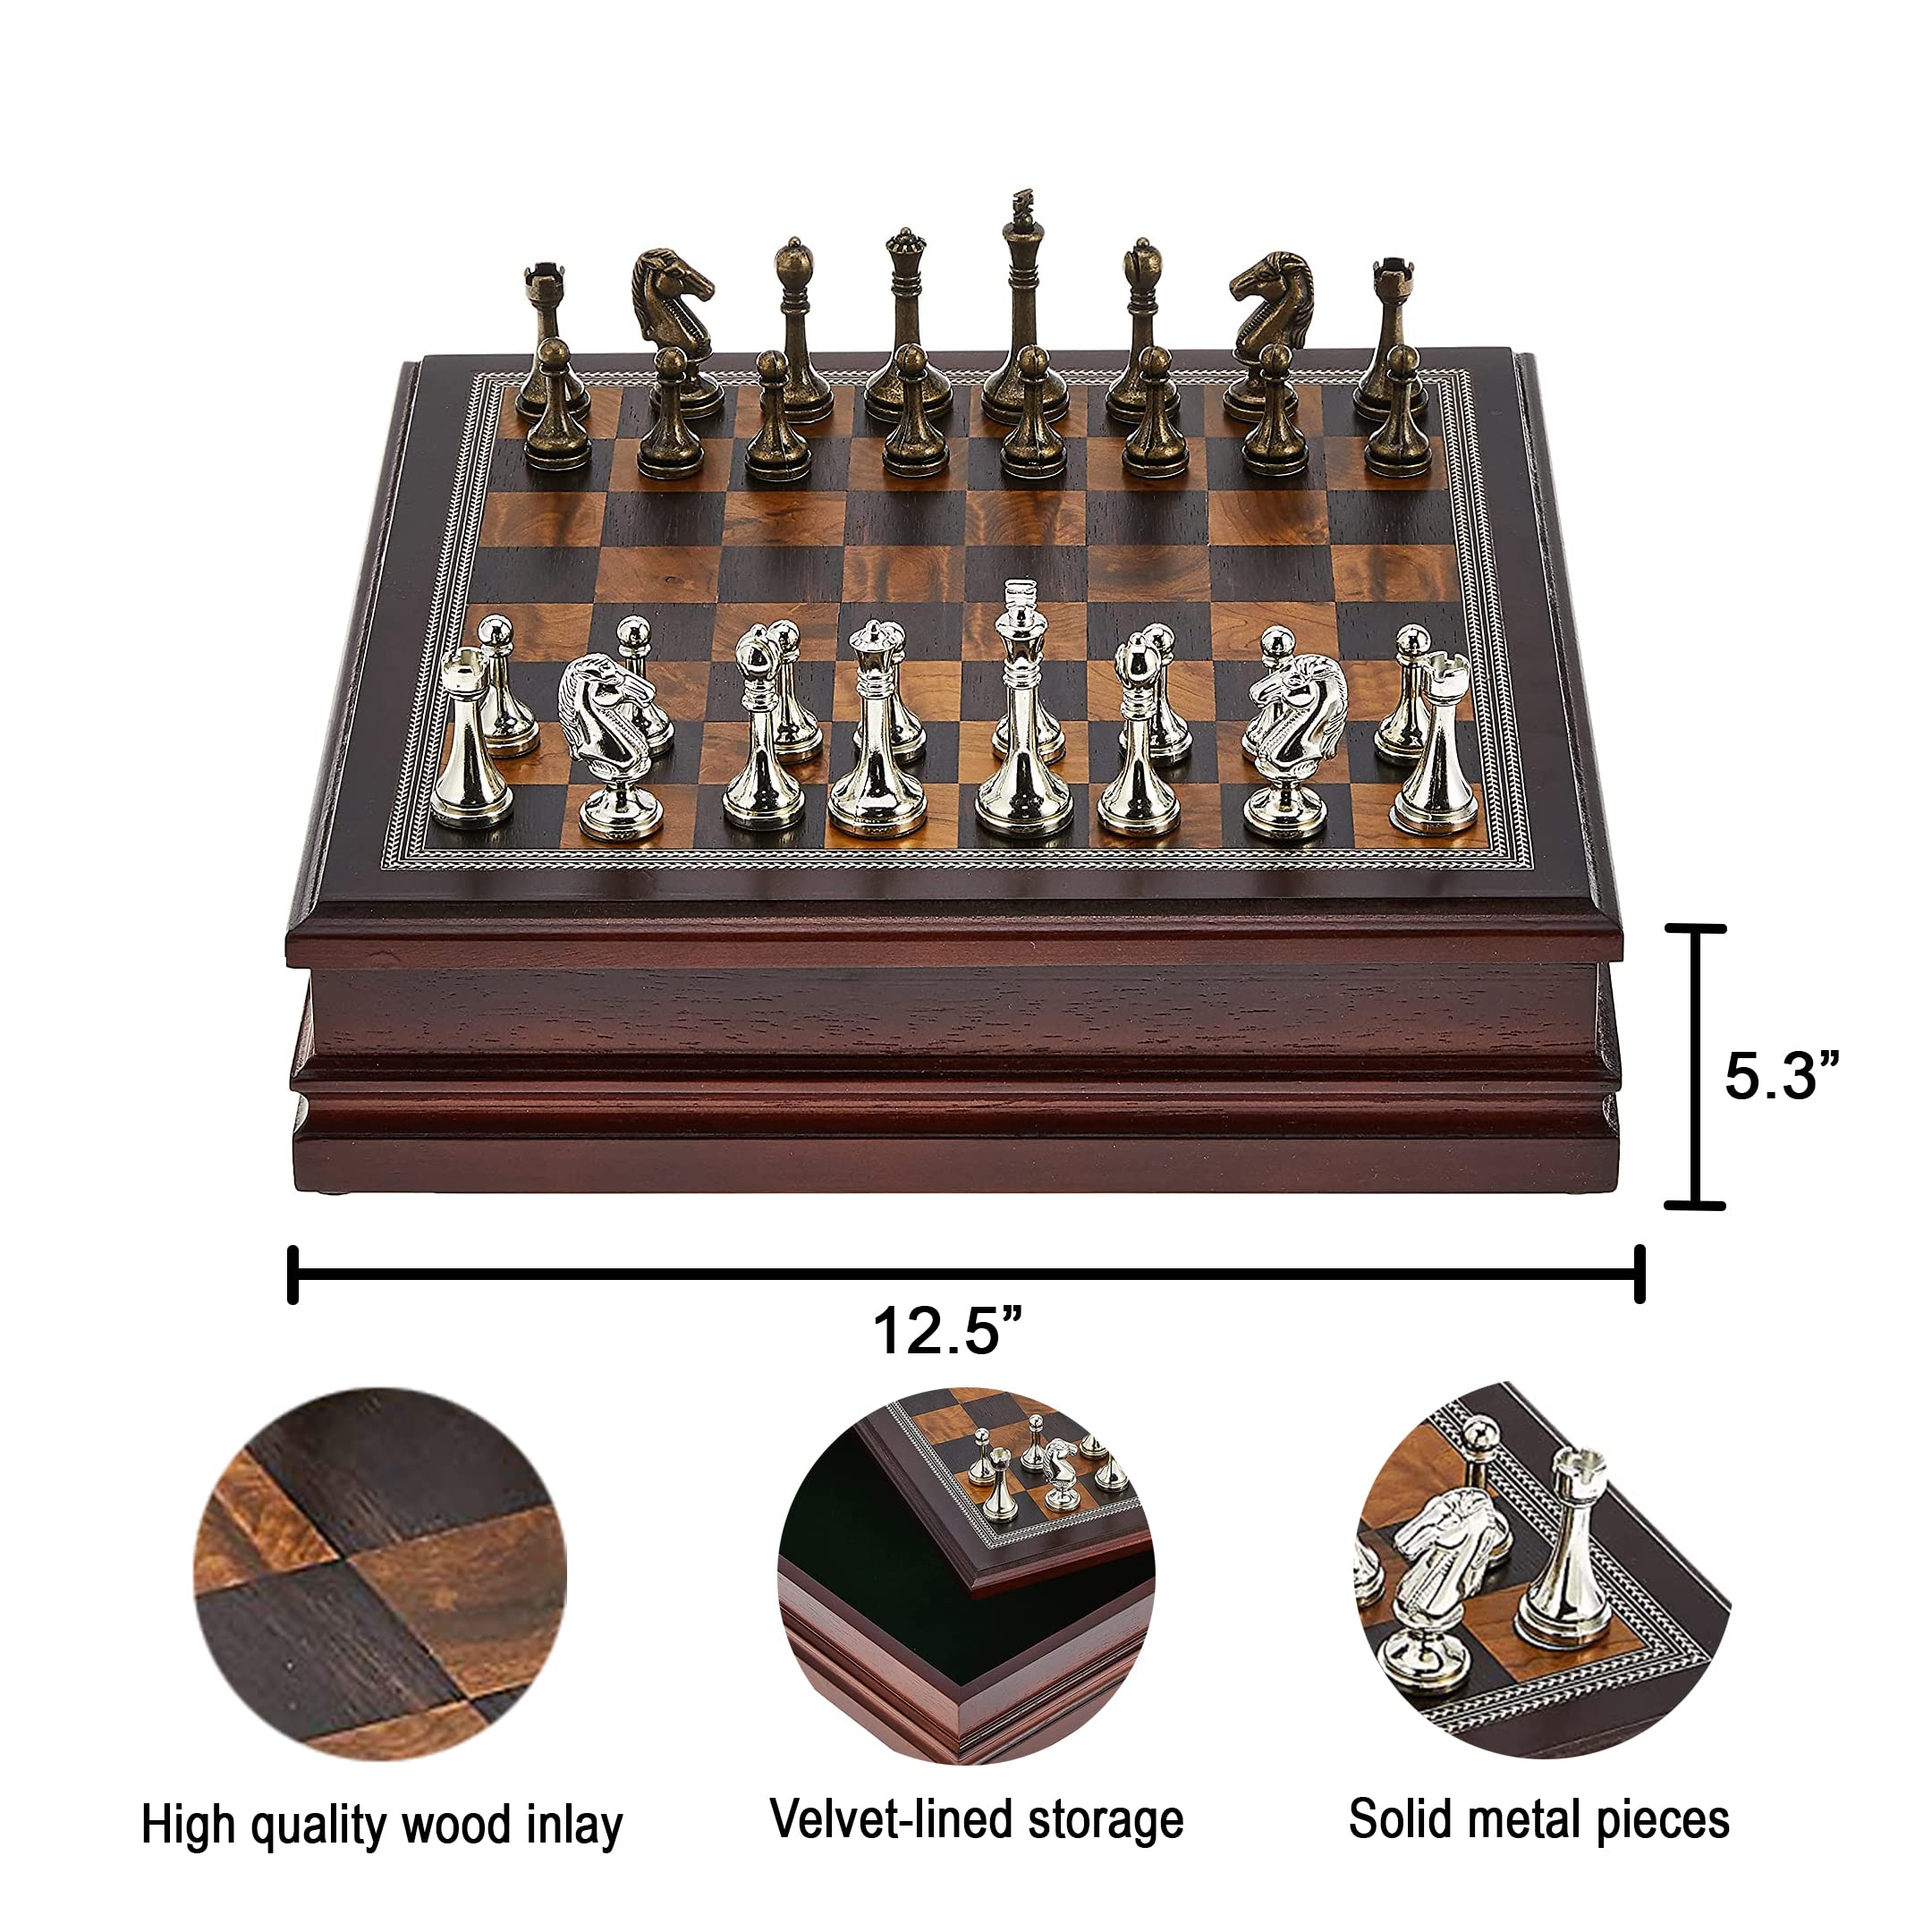 Classic Game Collection Metal Chess Set with Deluxe Wood Board and Storage - 2.5